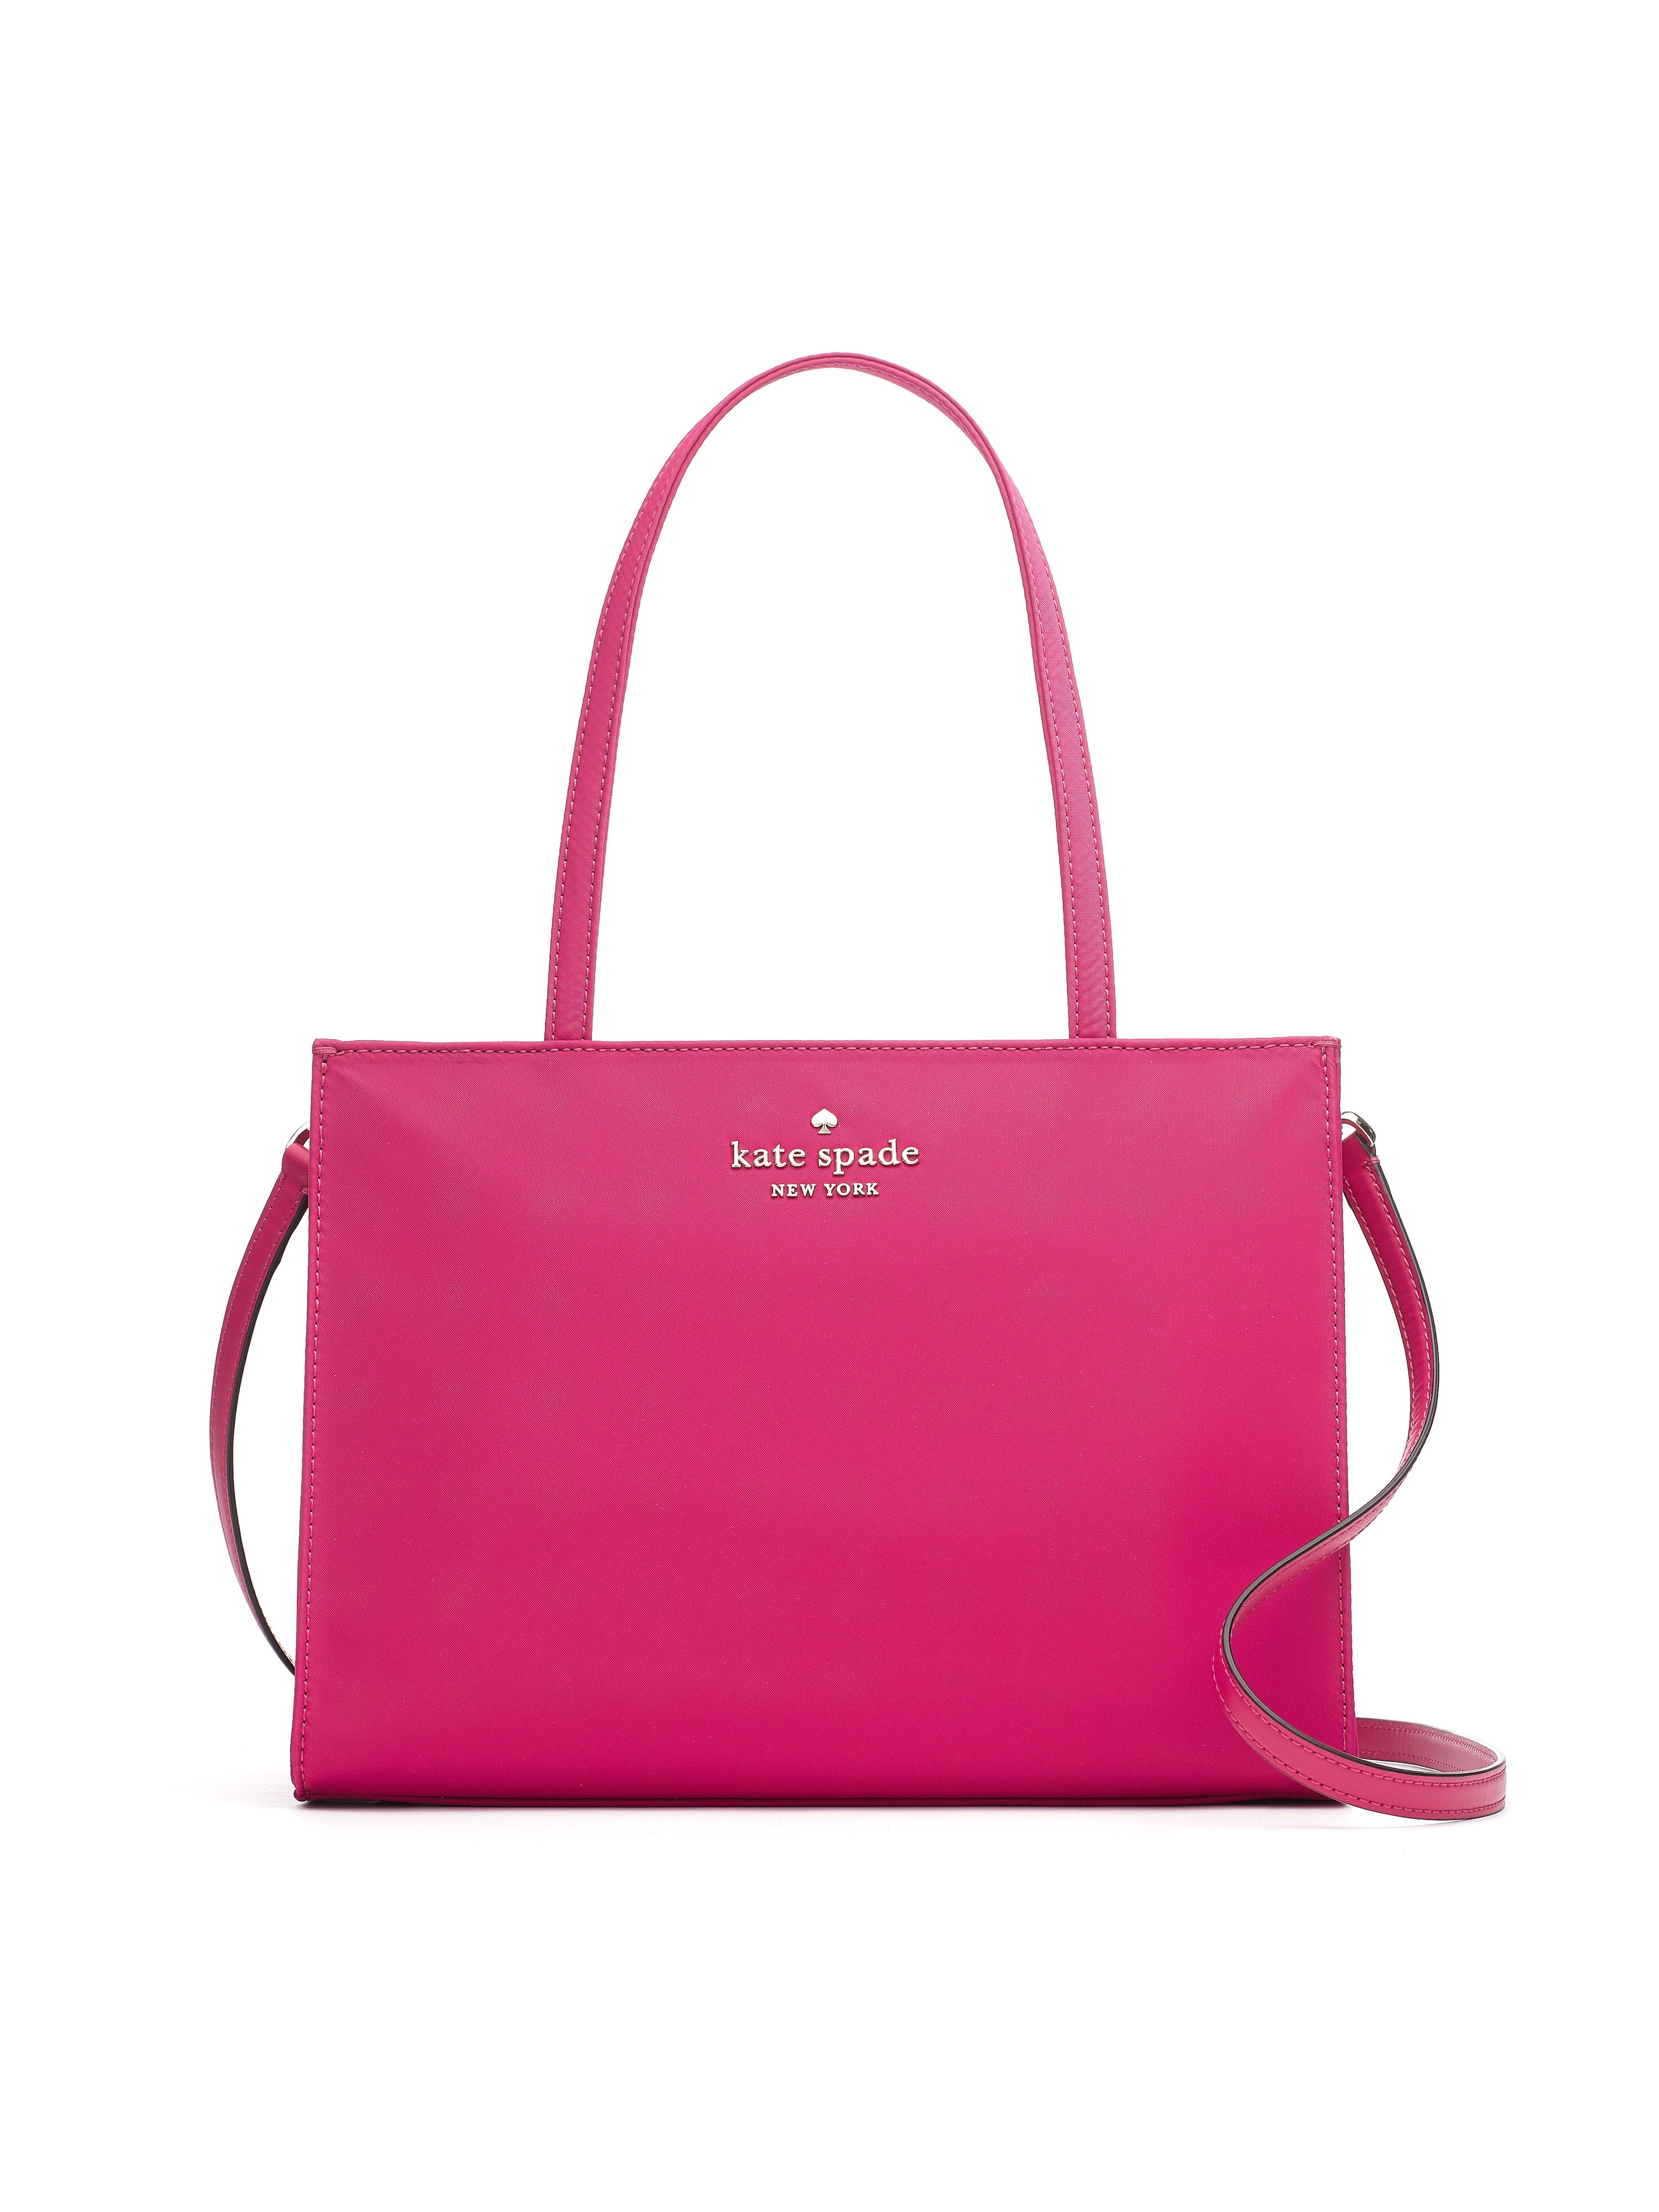 Avenue pump complete Kate Spade Is Reissuing the Box Bag from Your Youth